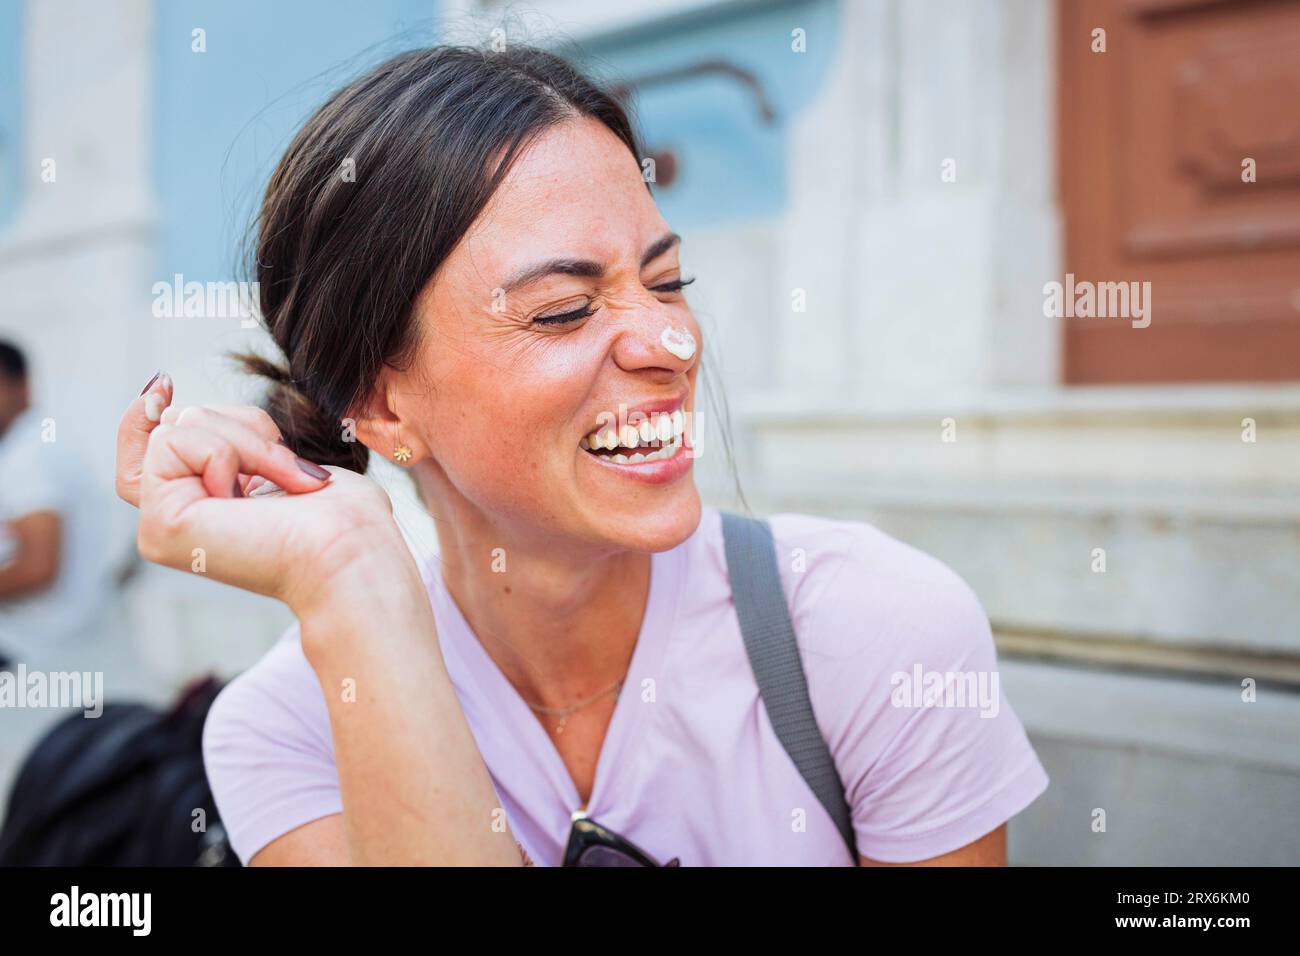 Cheerful woman laughing with ice cream on nose Stock Photo